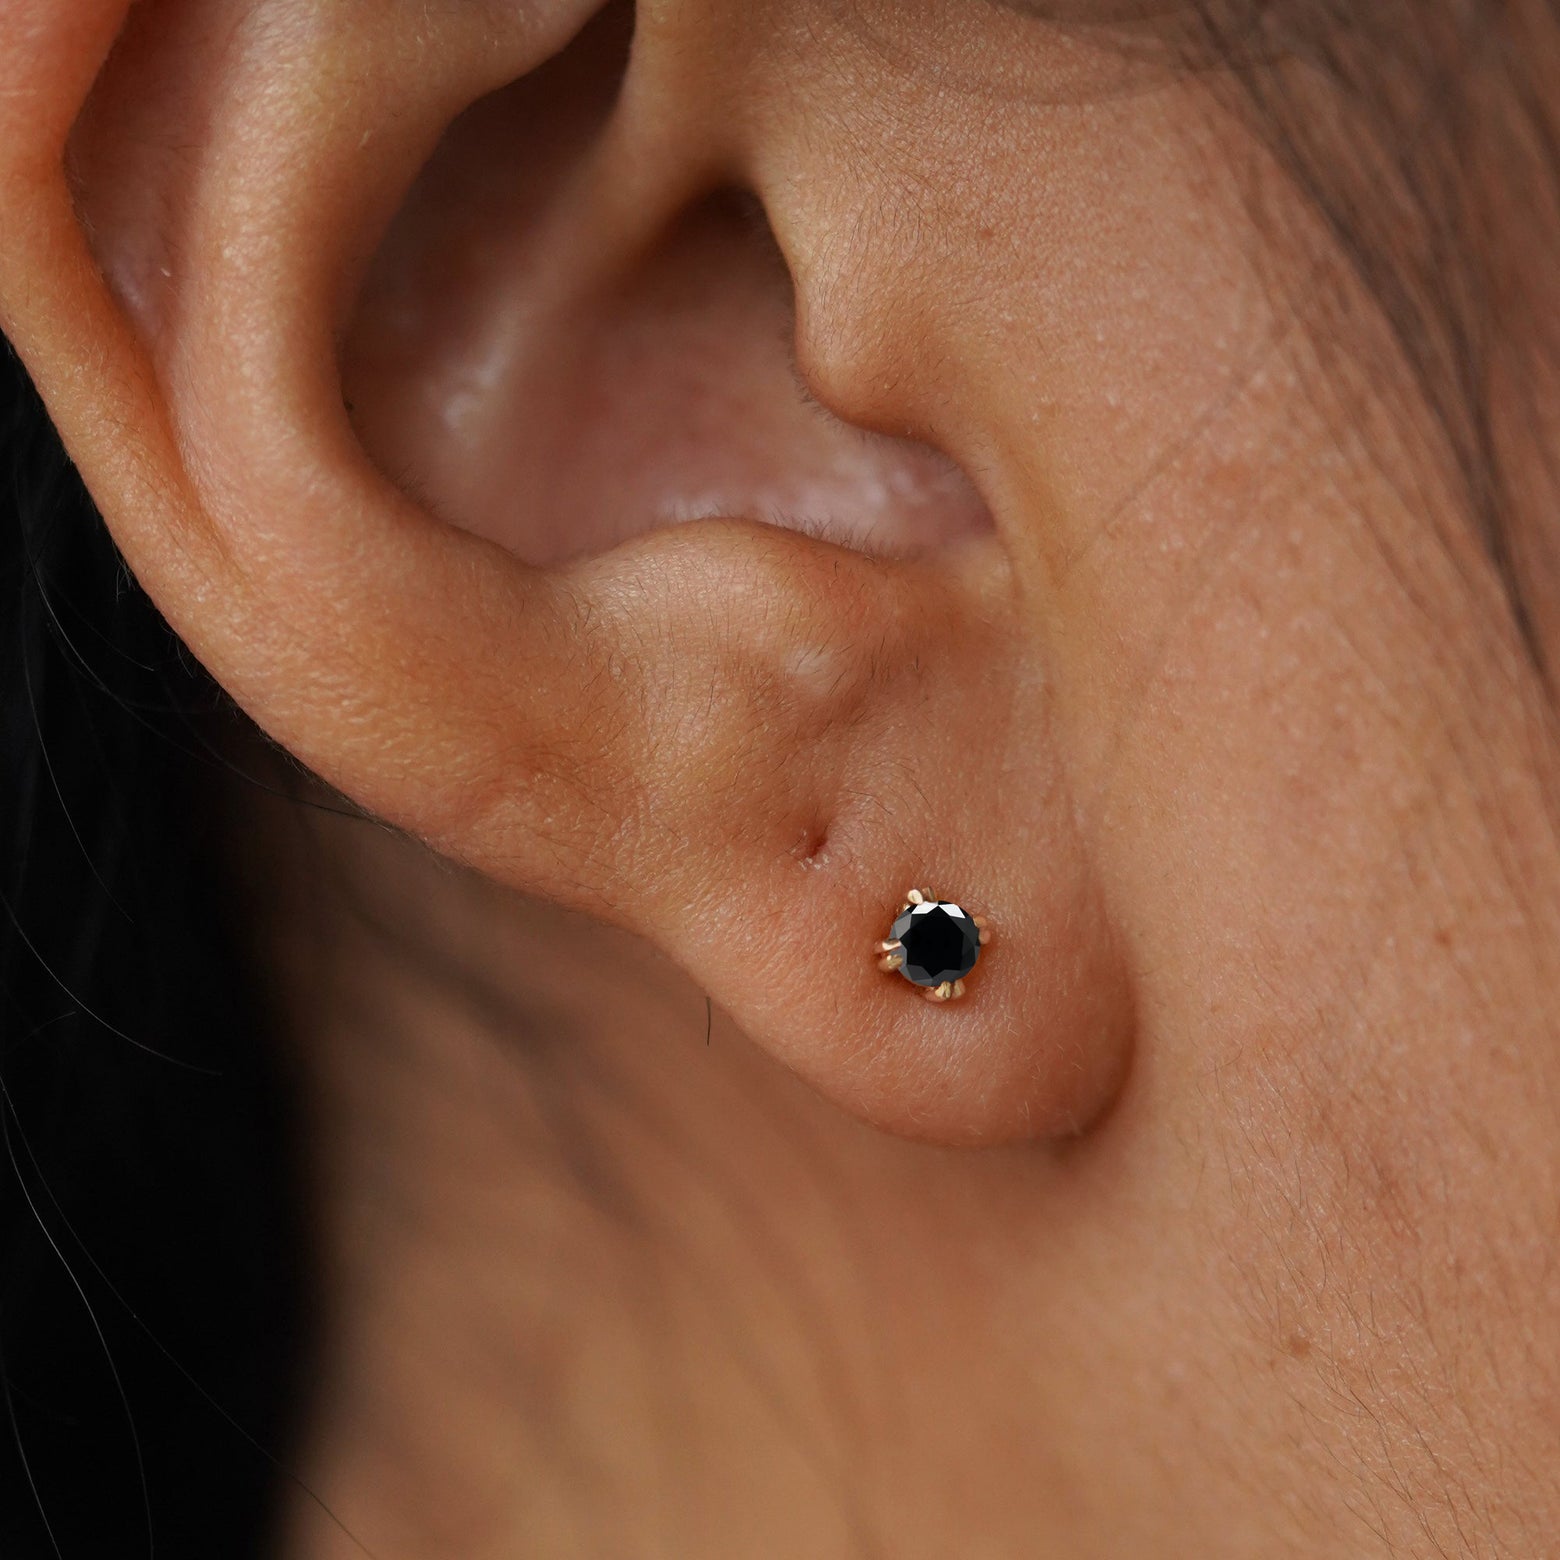 Close up view of a model's ear wearing a 14k yellow gold Black Diamond Earring